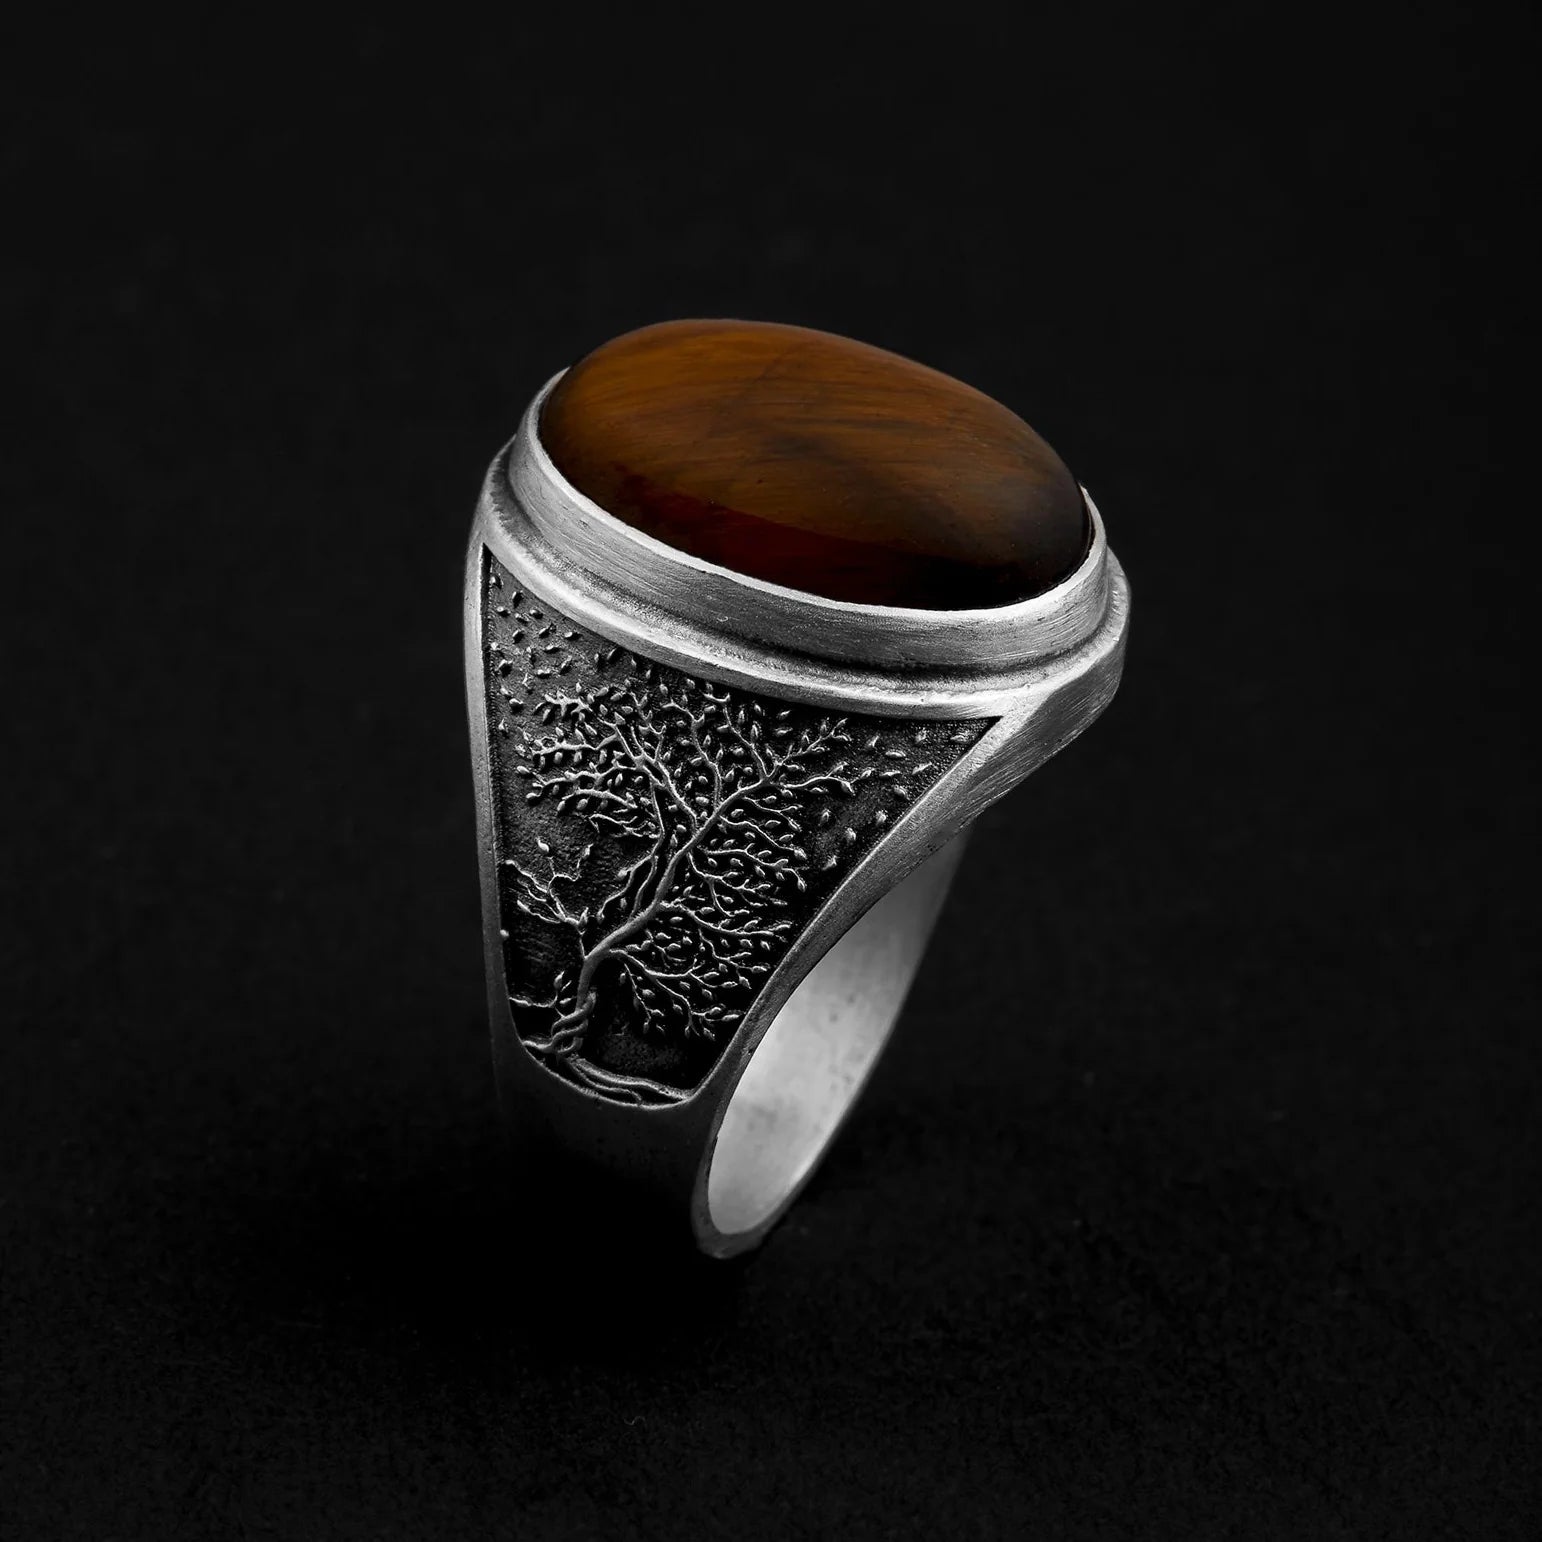 mens tiger eye gemstone ring, golden-brown elegance, presenting both style and significant metaphysical properties.